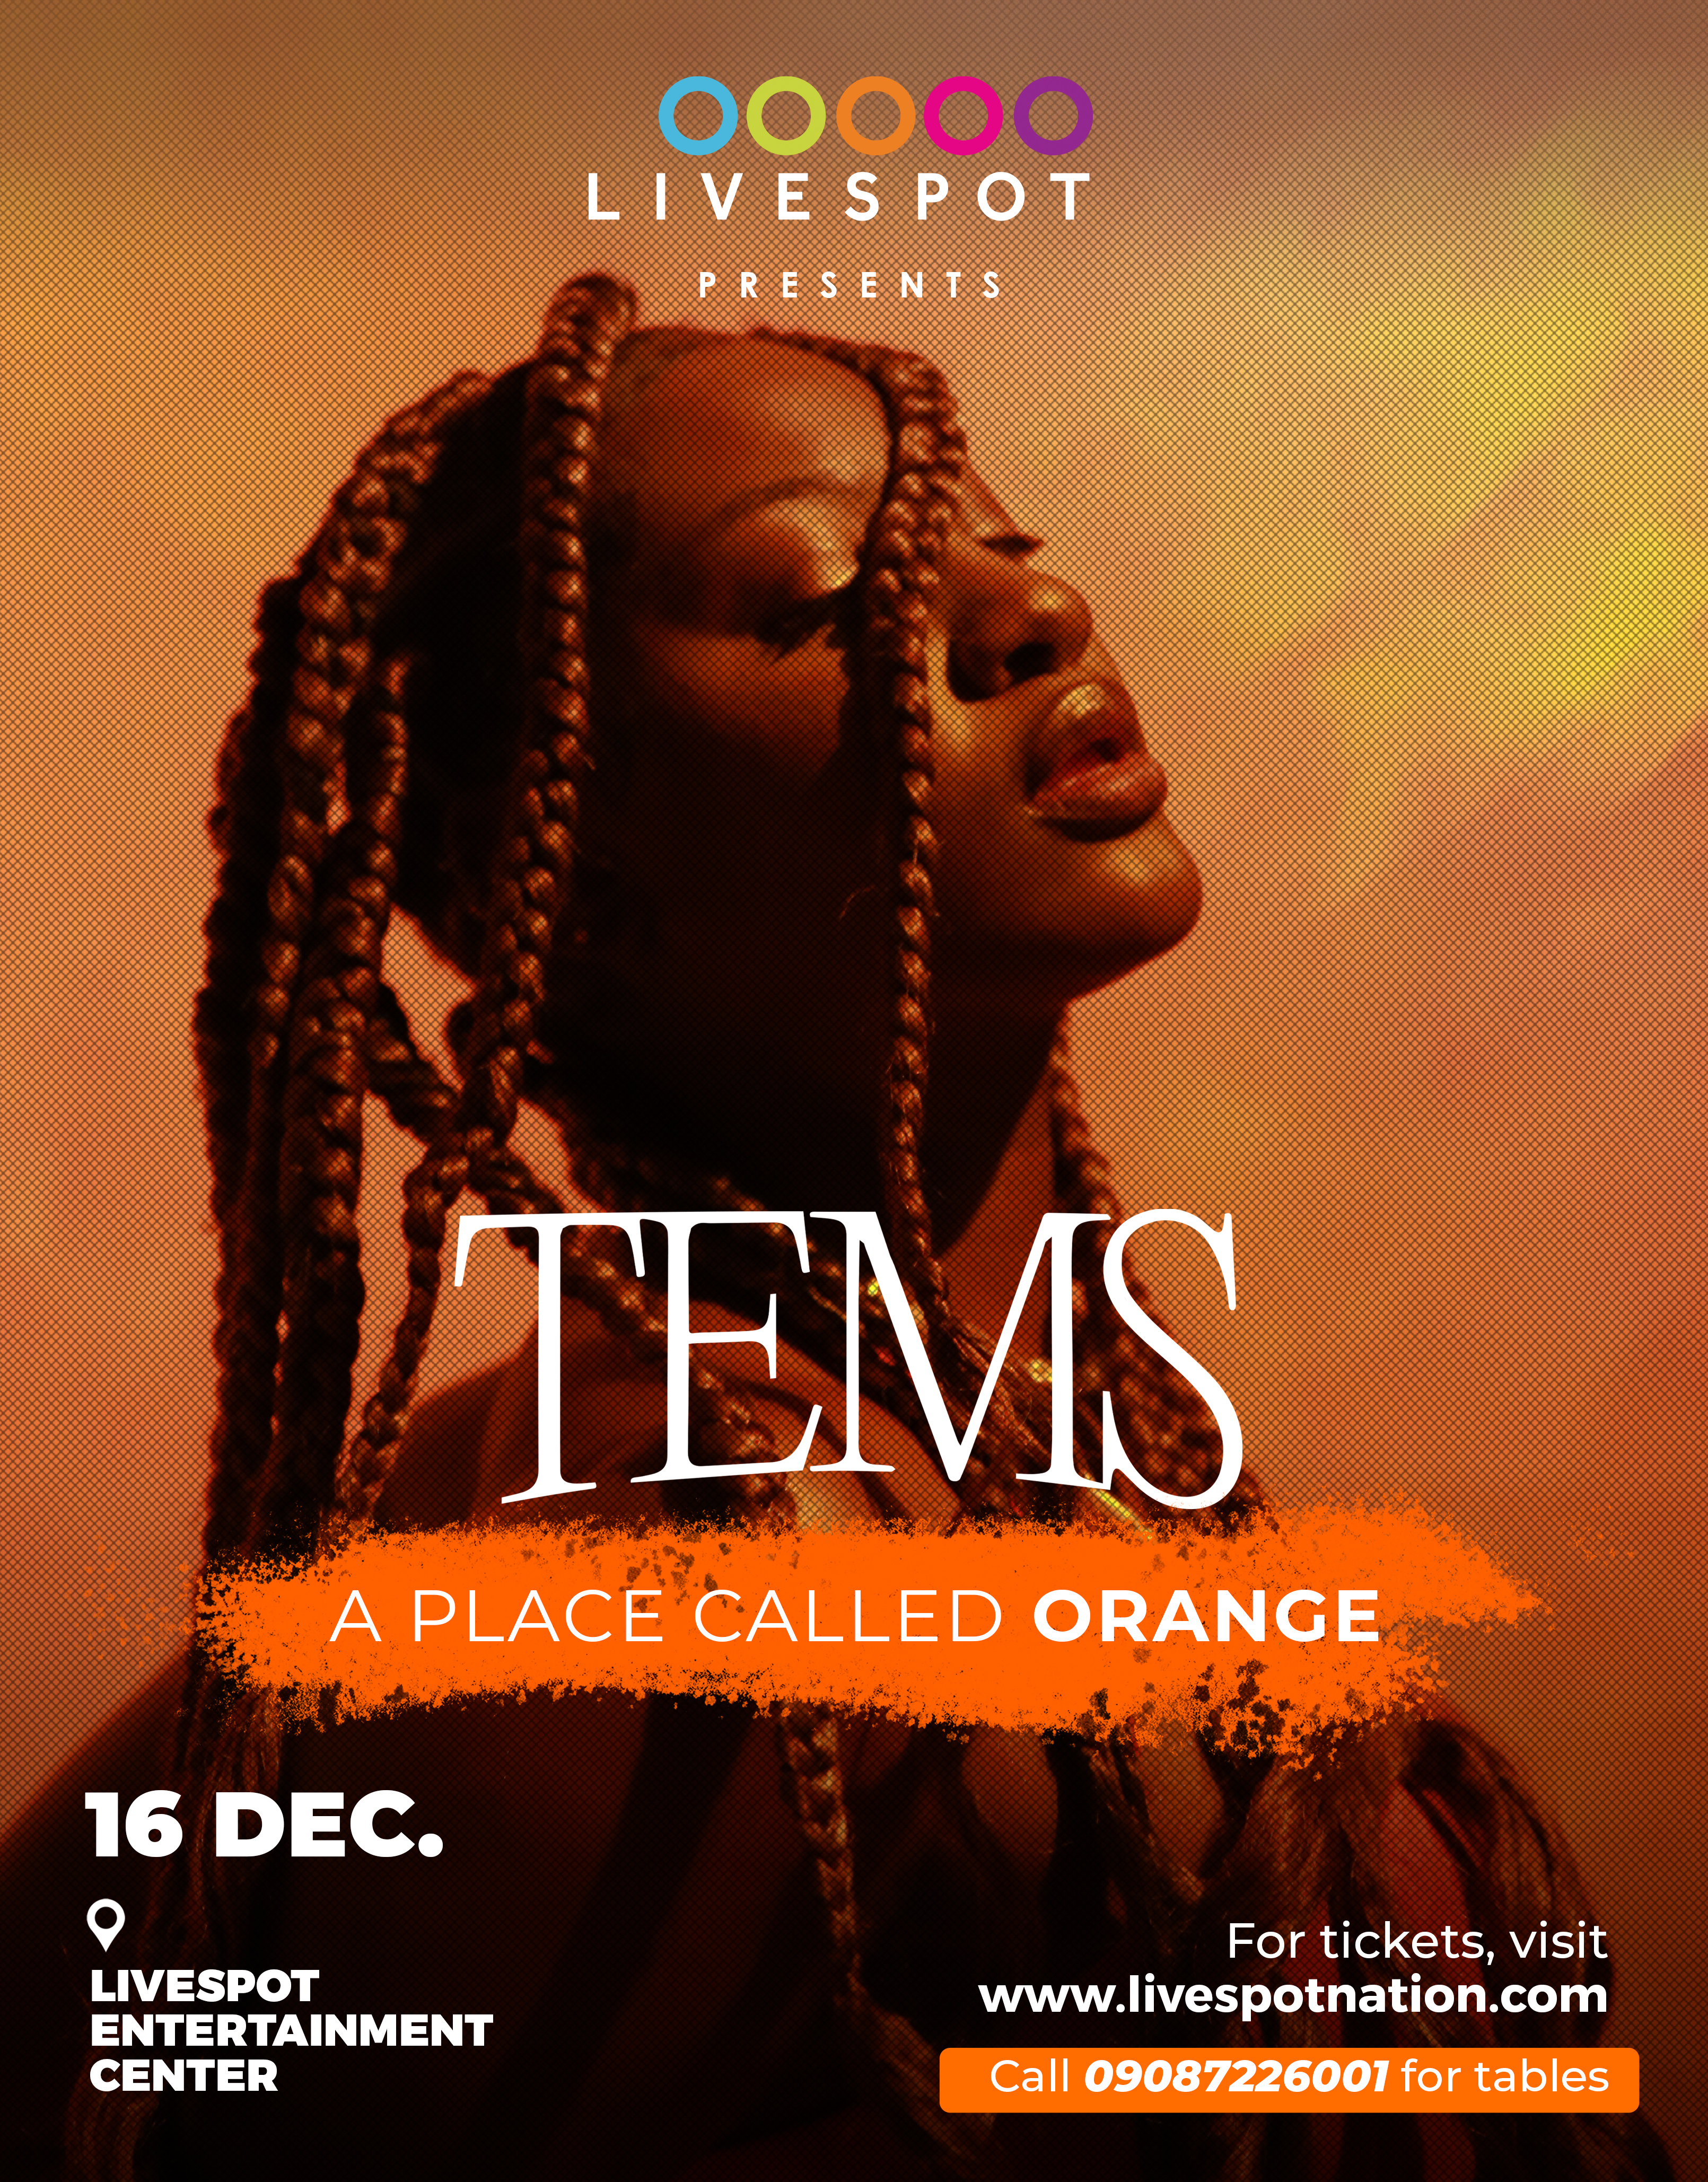 December 2021 Events Guide for Lagos, Nigeria: Livespot Presents Tems - A Place Called ORANGE Concert .. Buy Tickets